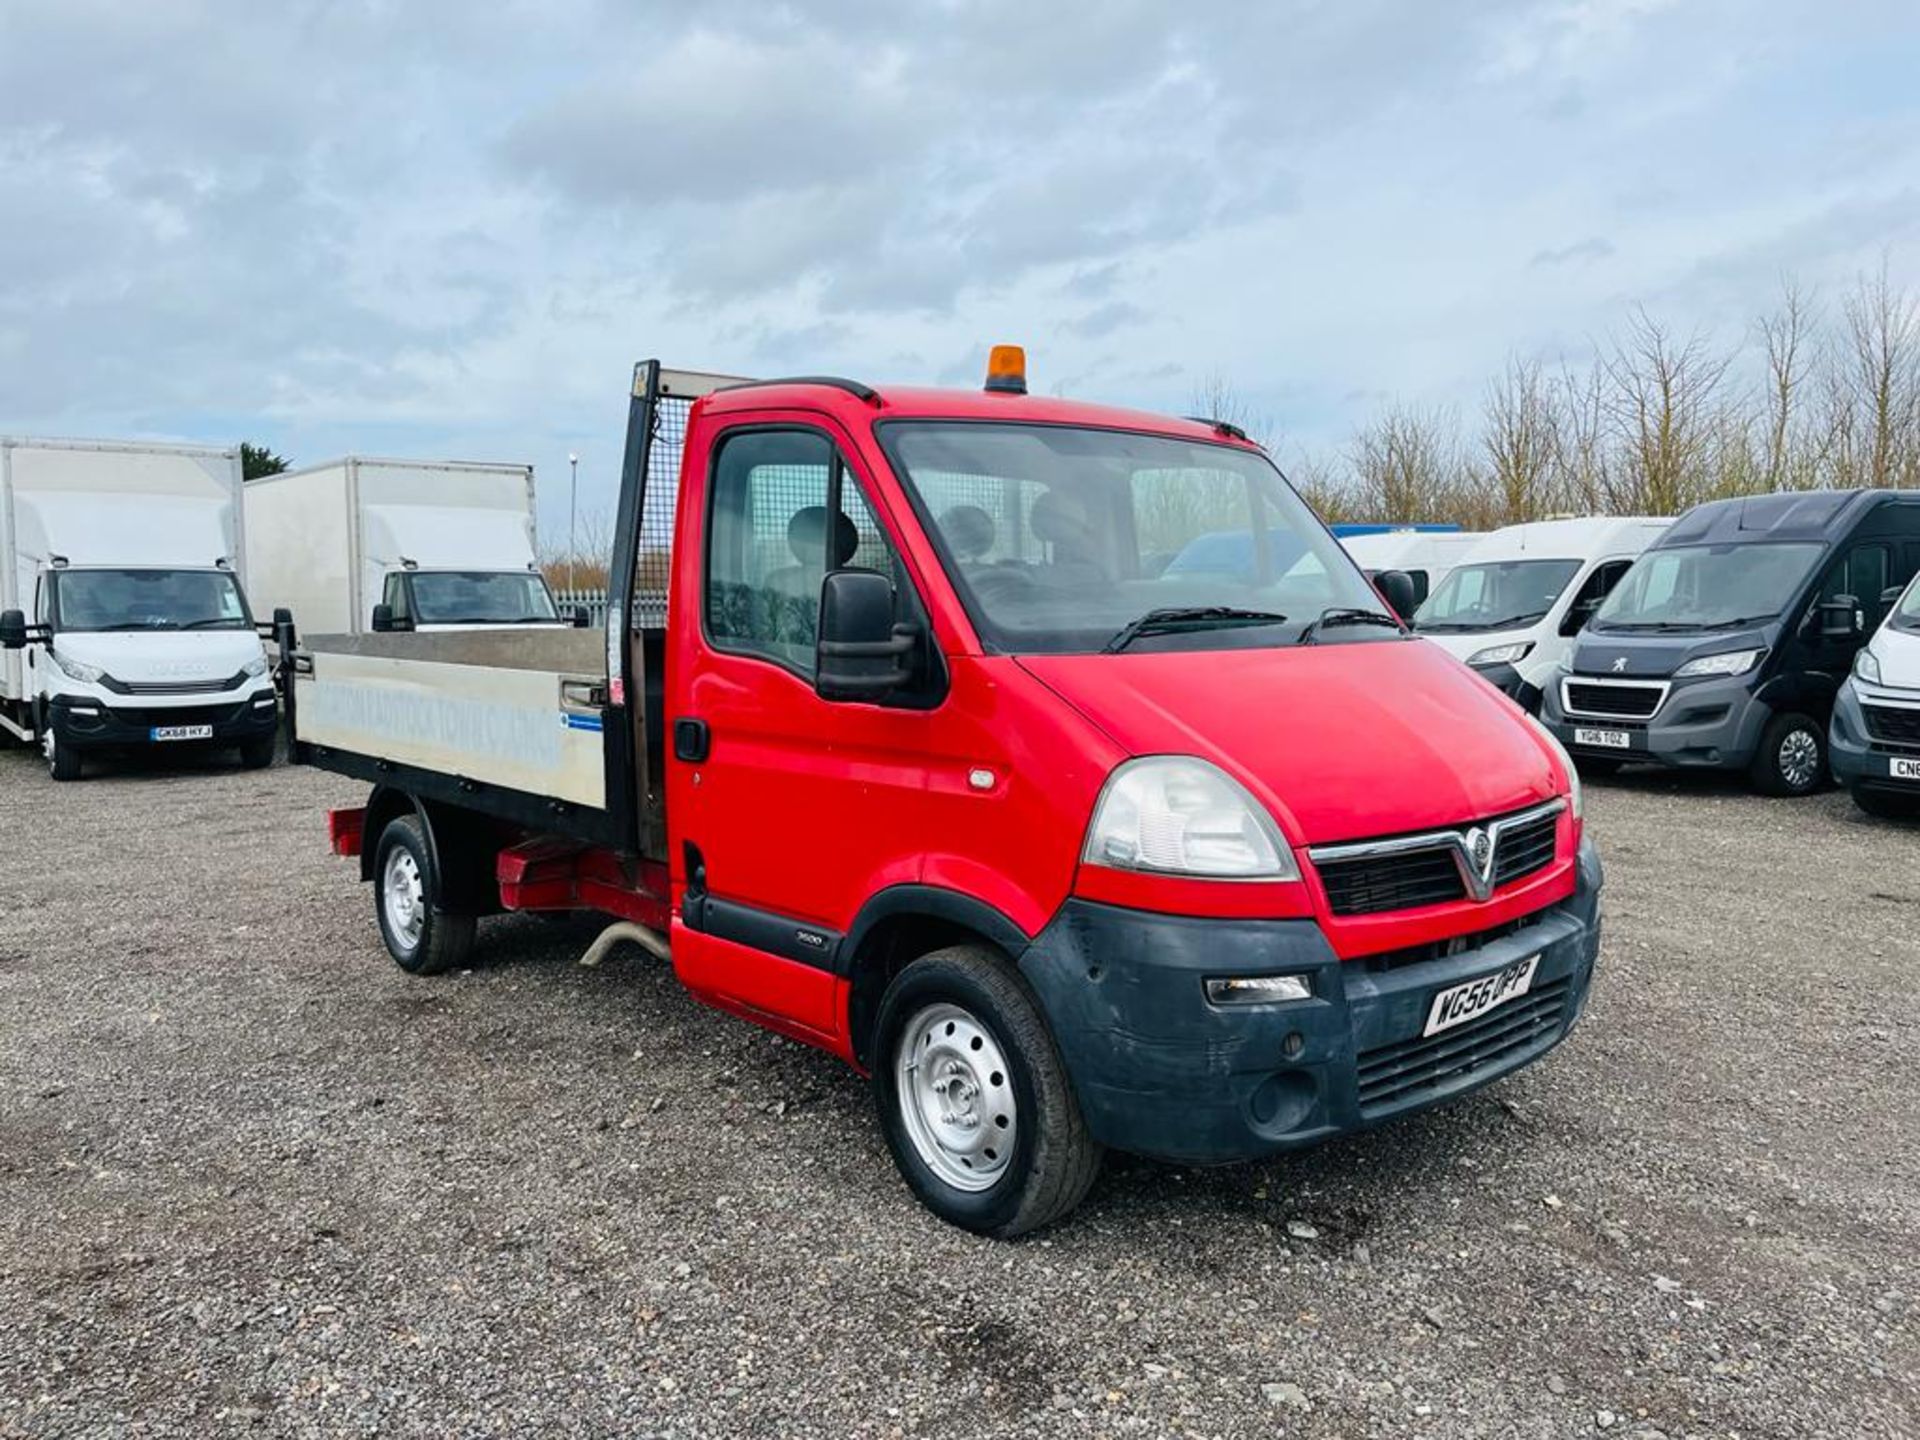 ** ON SALE ** Vauxhall Movano 2.5 CDTI 3500 L2 Tipper 2007 '56 Reg' - Only 78,295 Miles